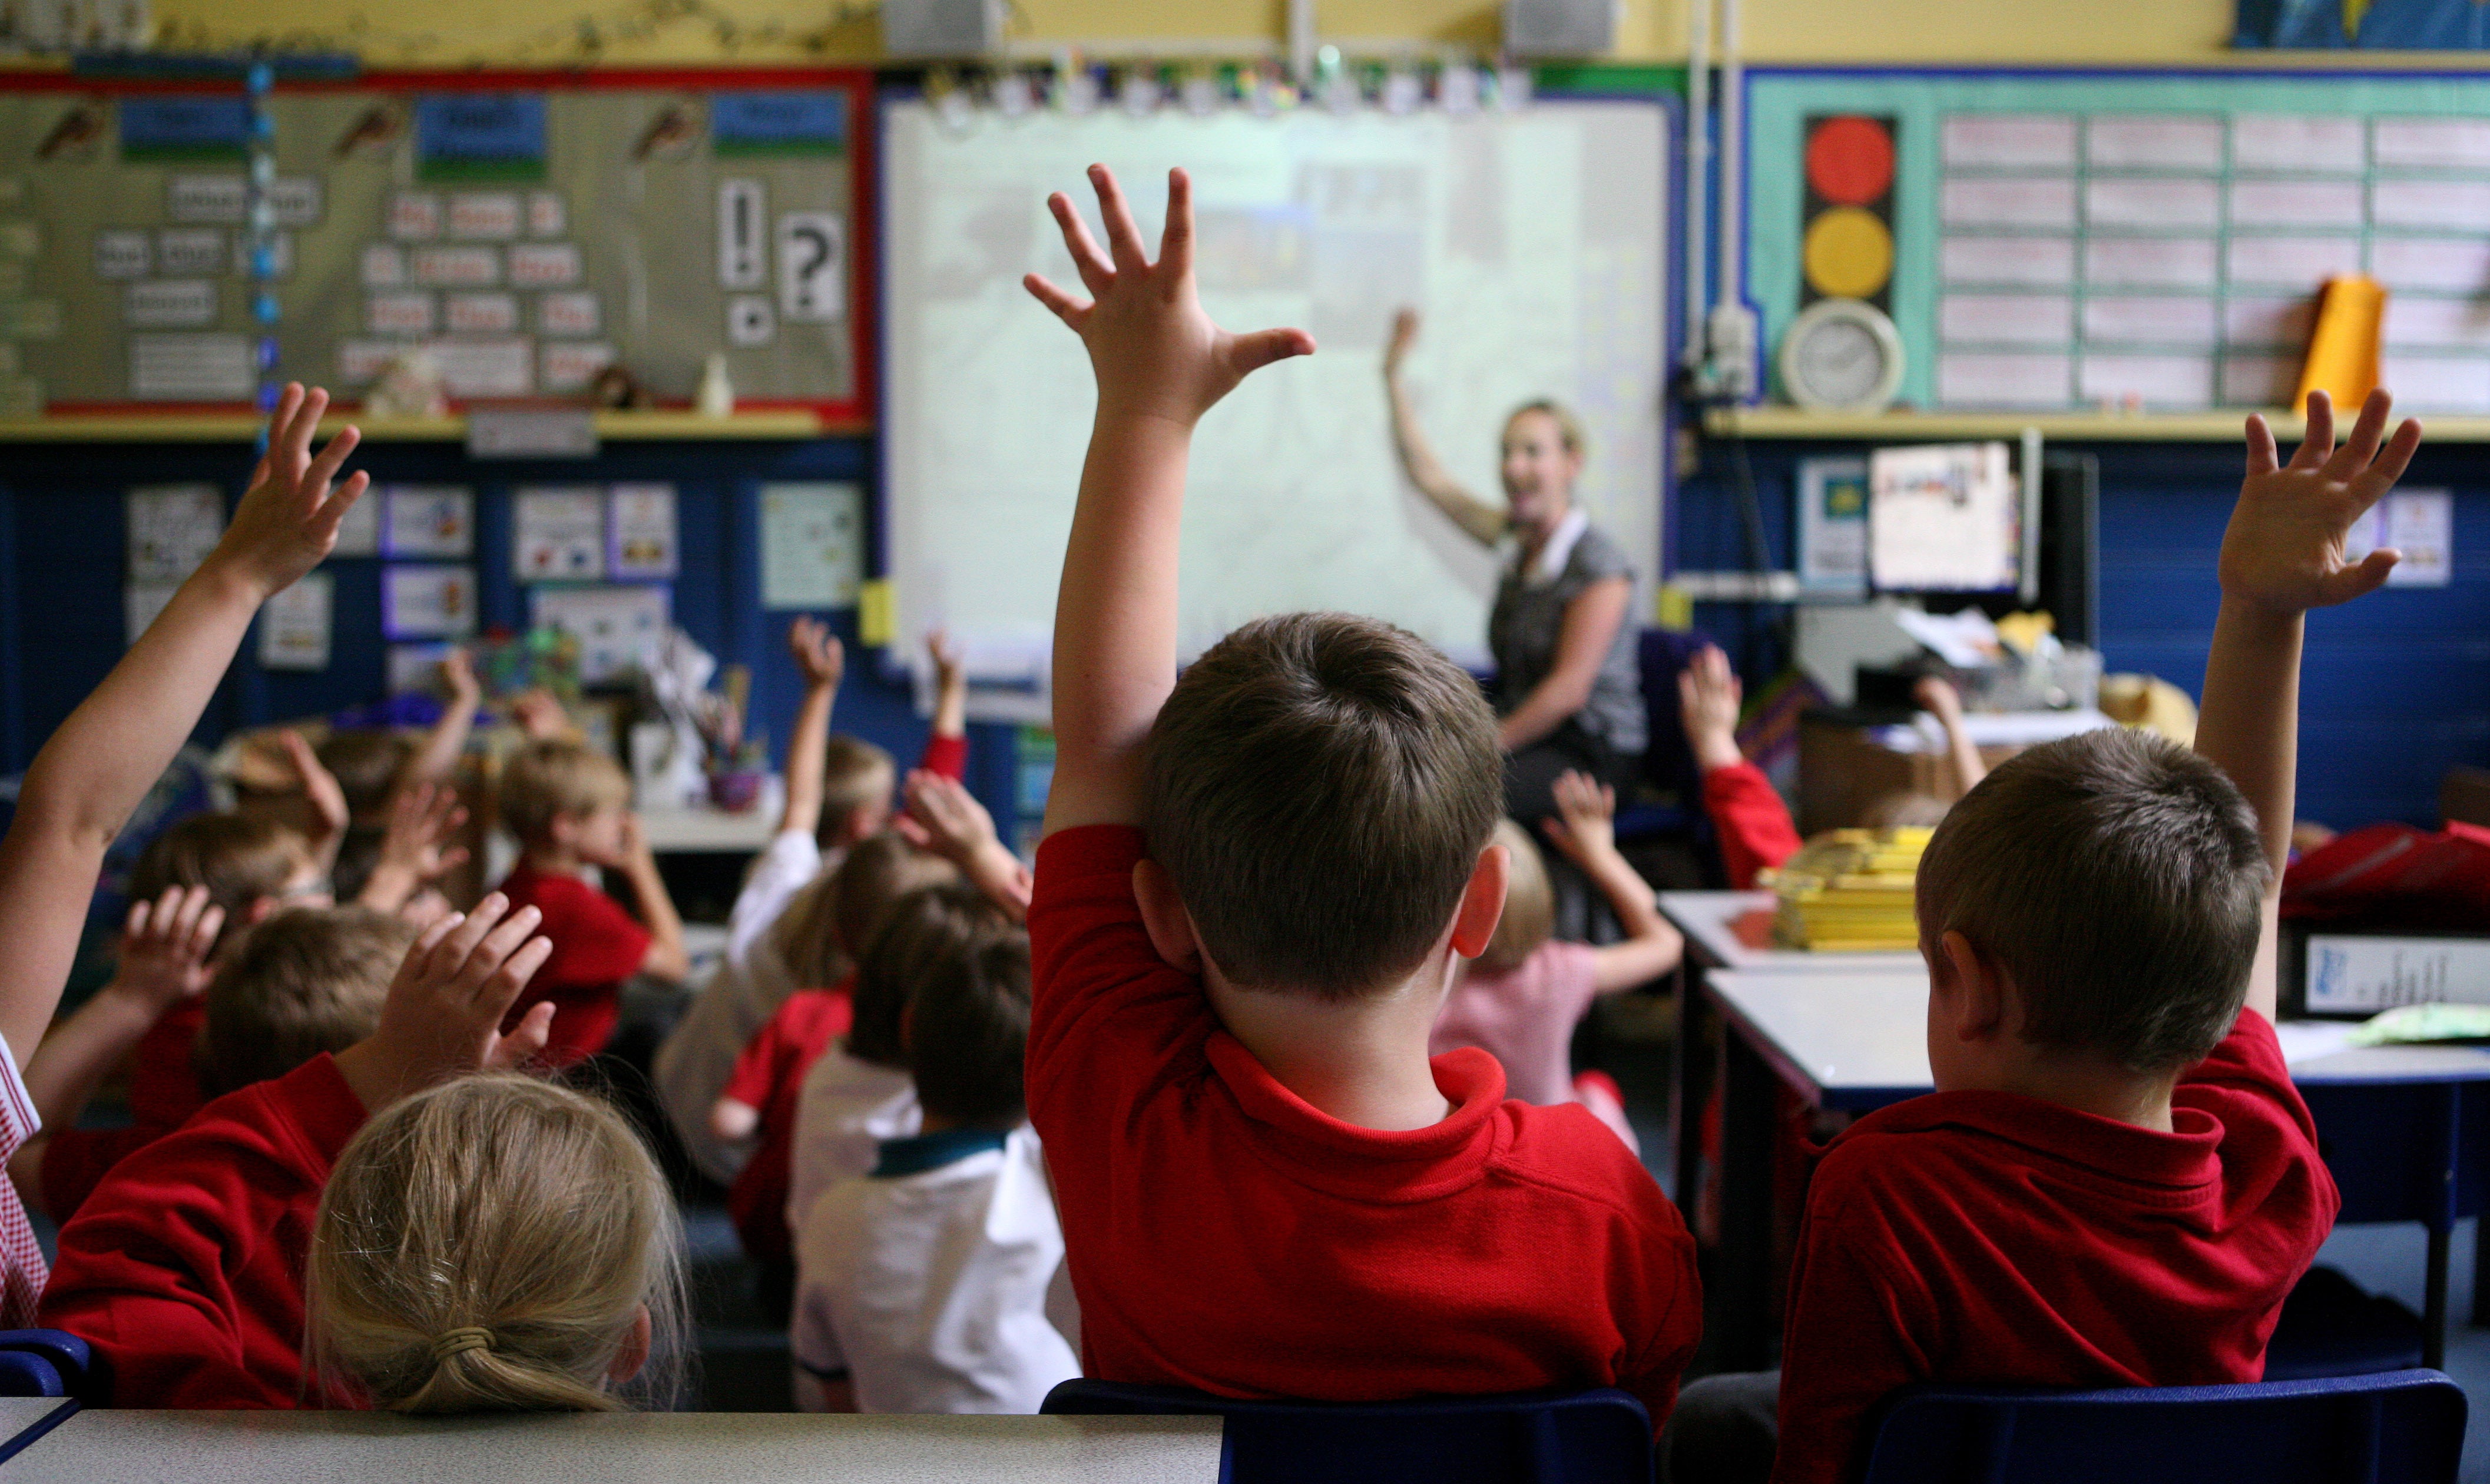 Children raise their hands to answer a question (Dave Thompson/PA)